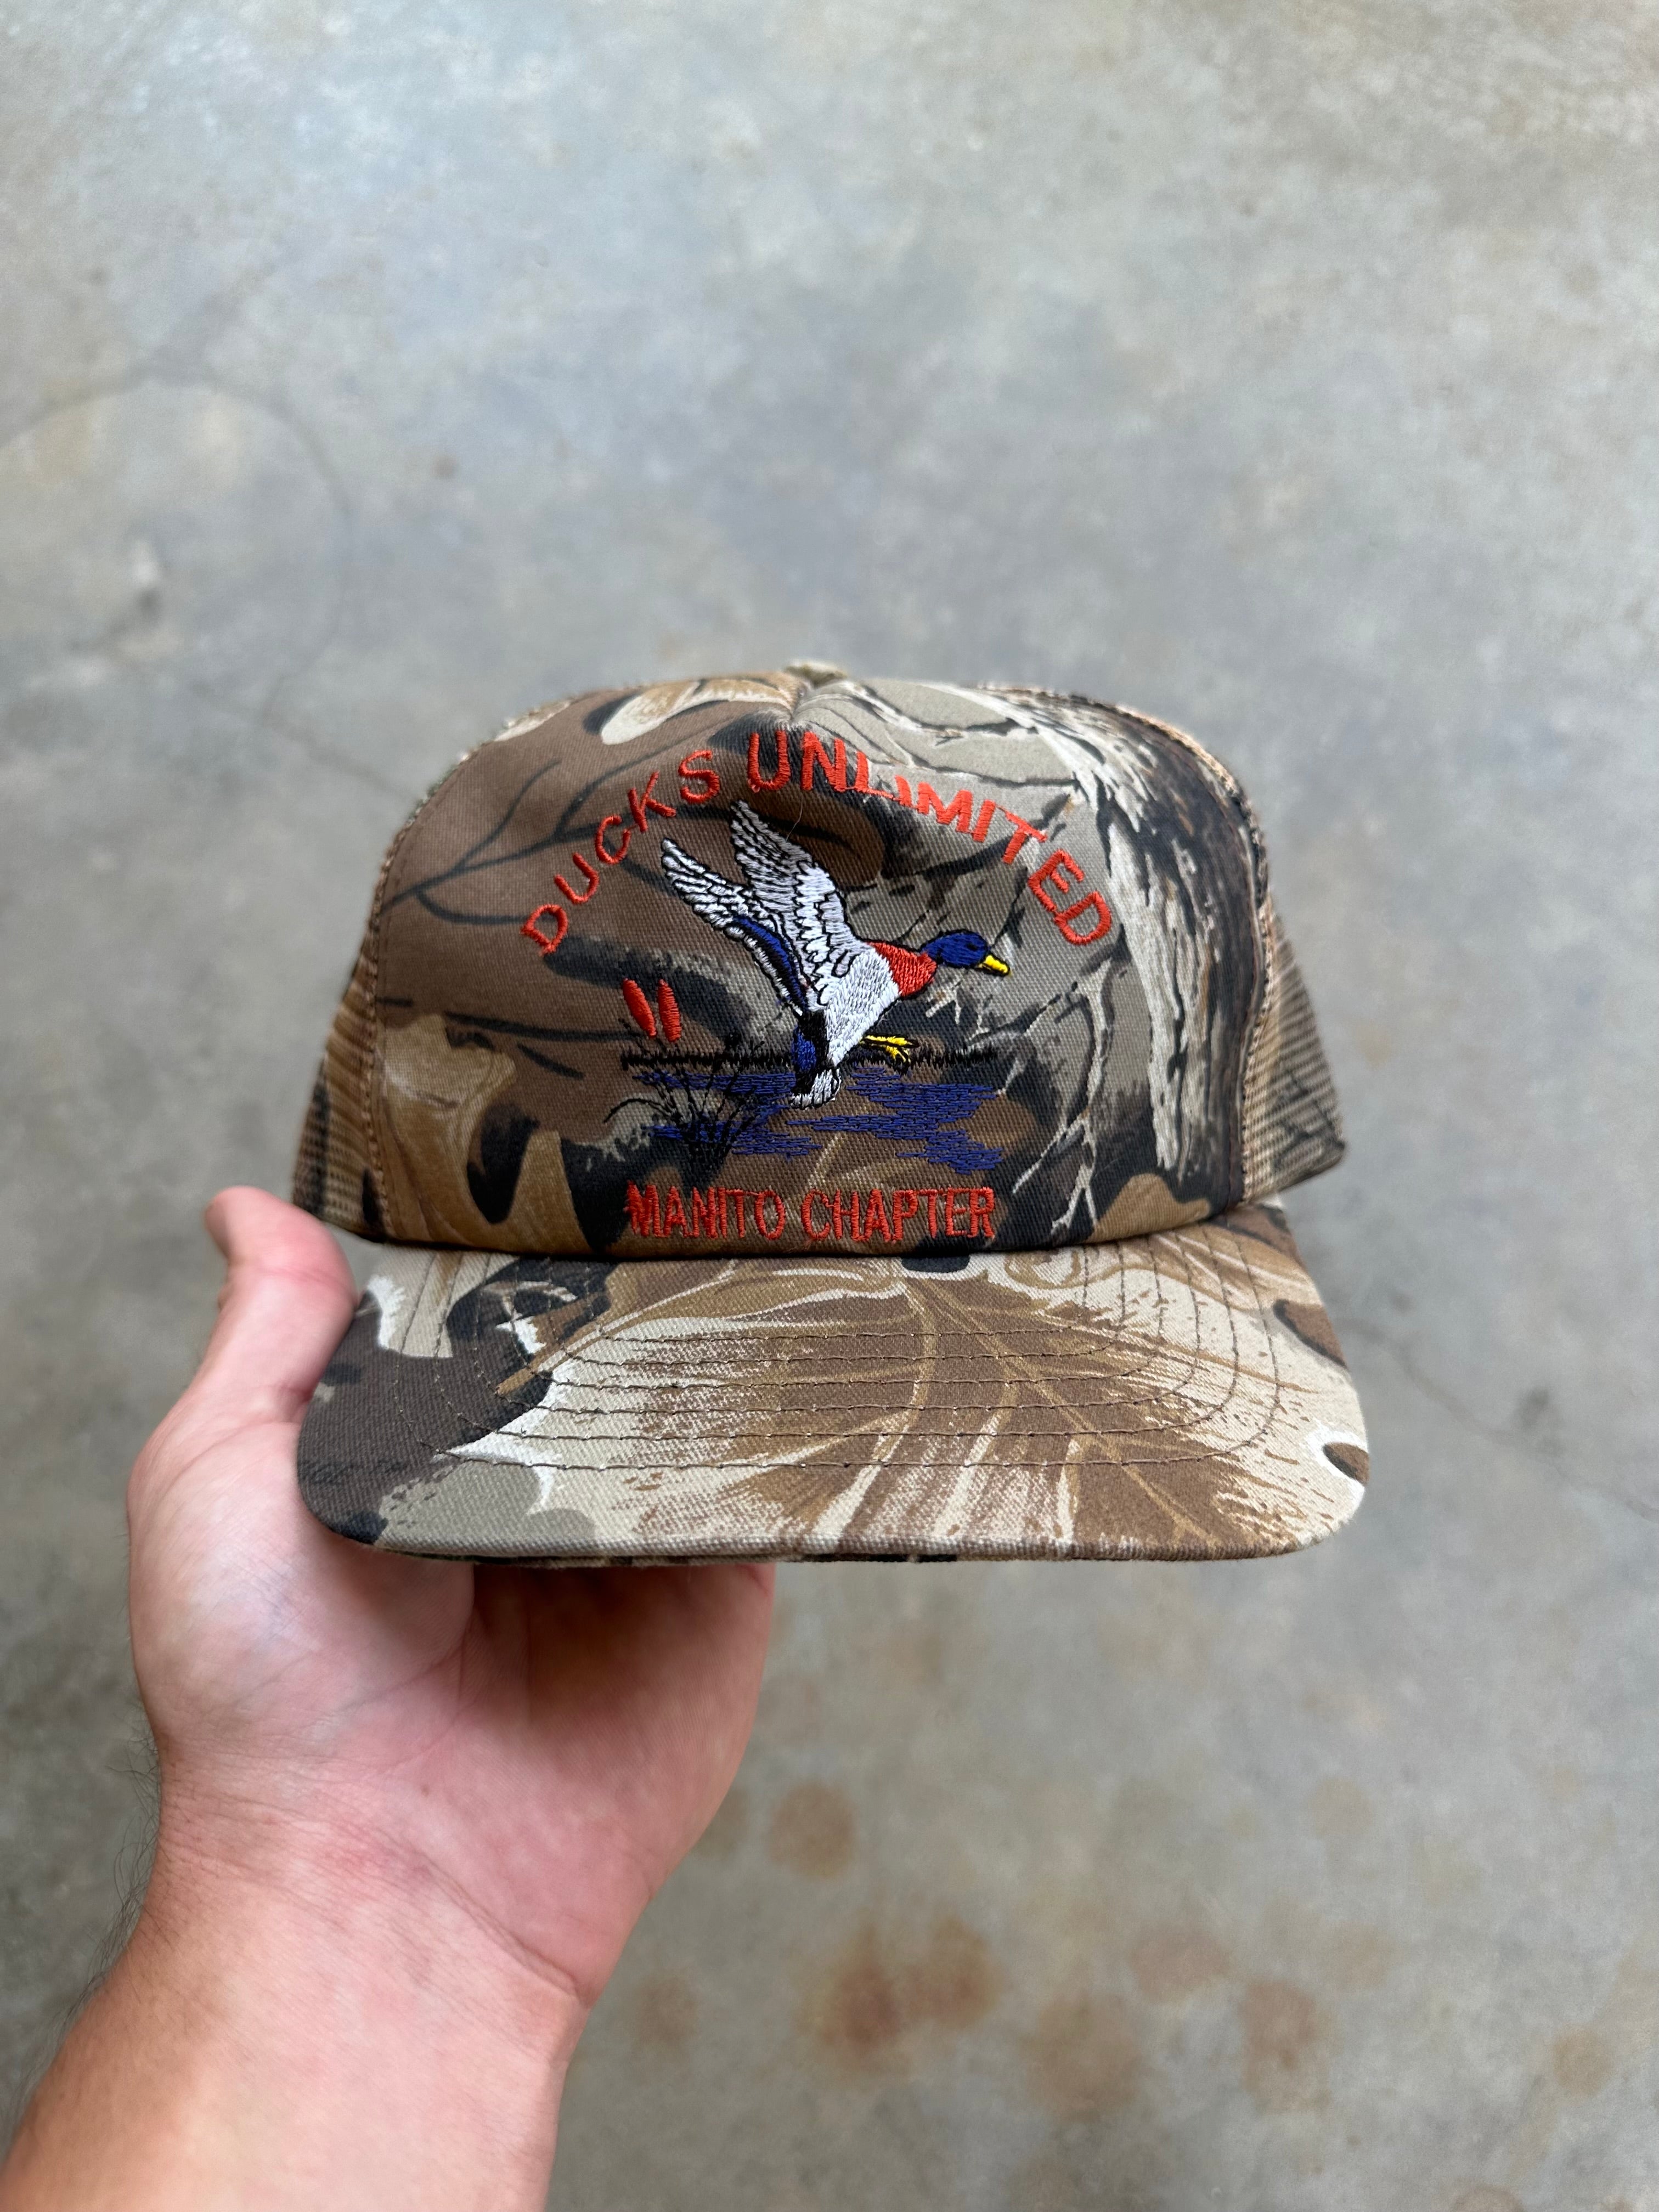 1990s Ducks Unlimited Manito Chapter Snapback